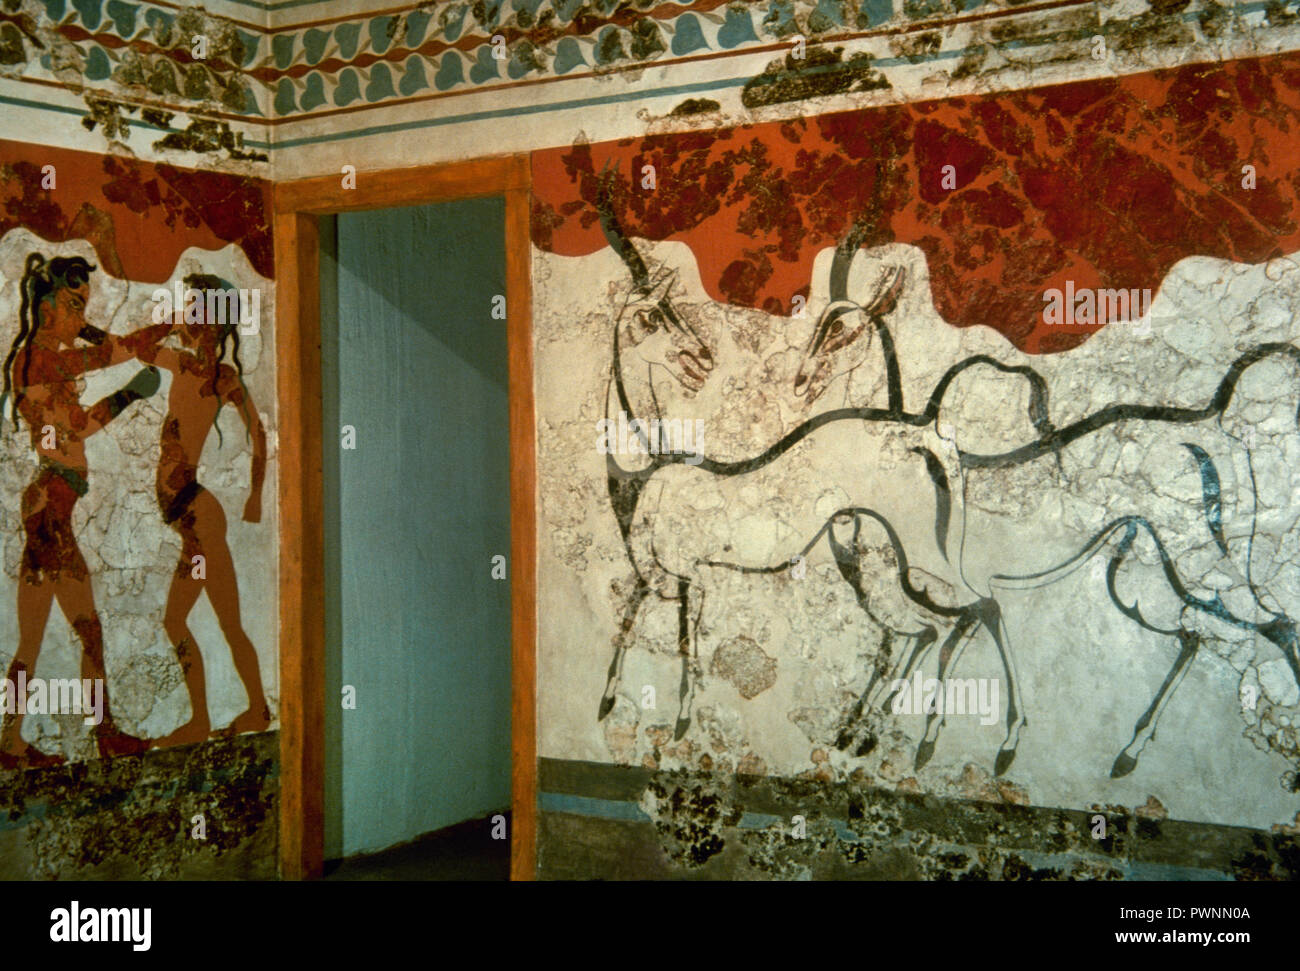 The Boxer and The Antelope fresco. 16th century BC. Room B1. Building B. Detail. Akrotiri, Thera (now Santorini). National Archaeological Museum. Athens, Greece. Stock Photo